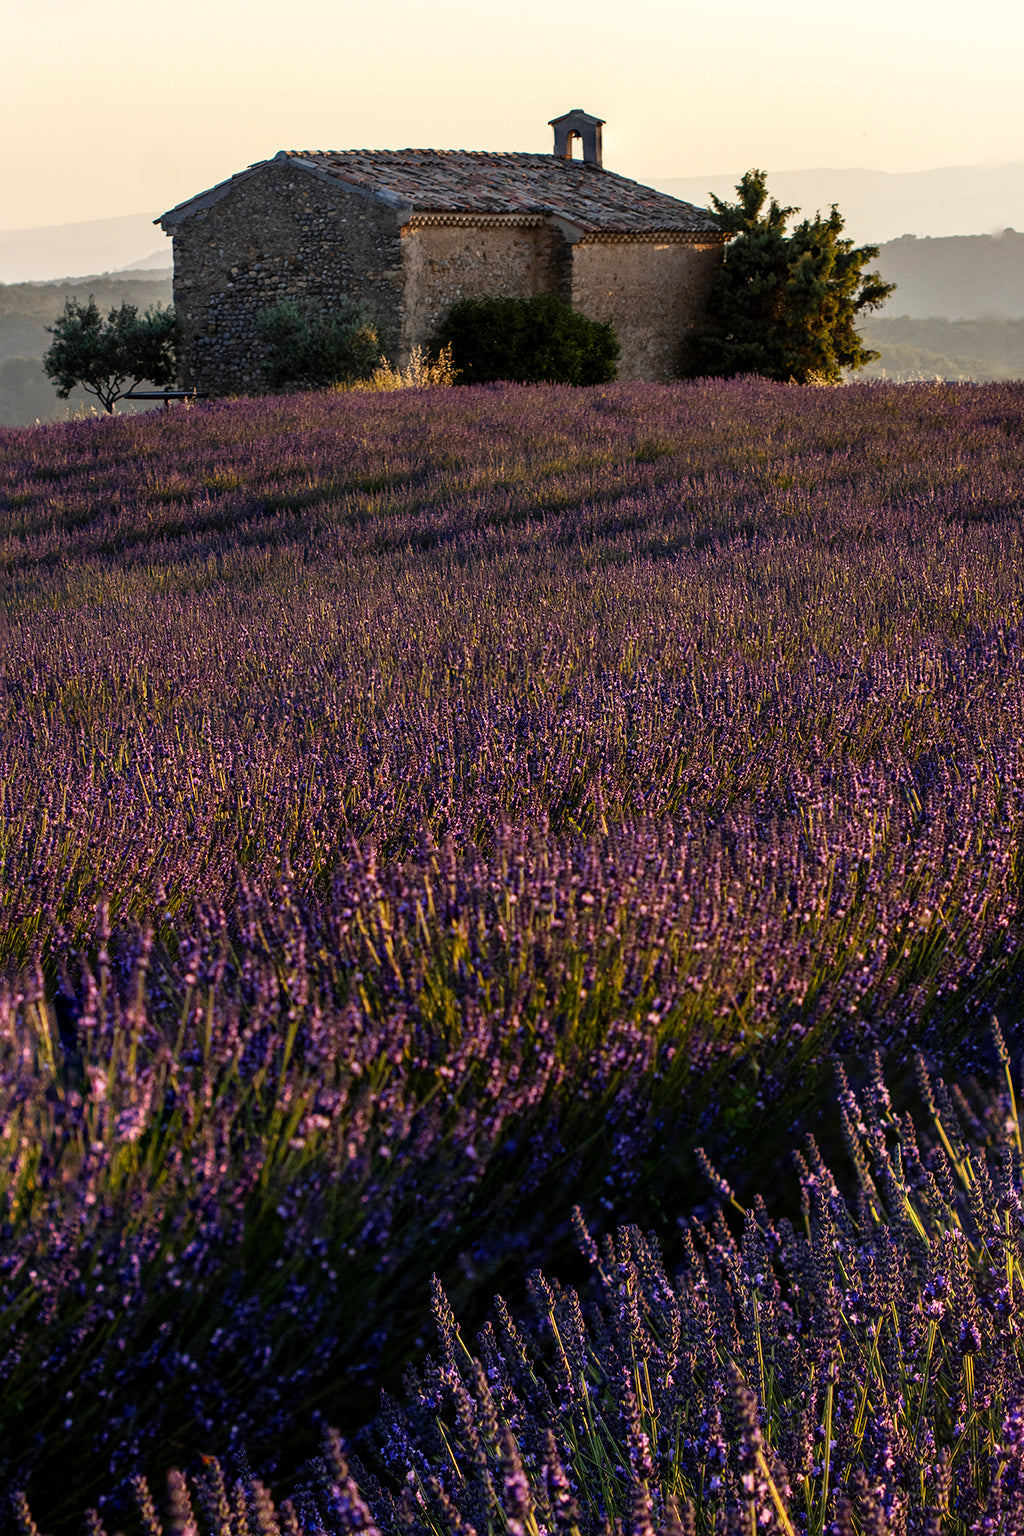 Plateau de Valensole Chapel in the midst of Lavender Fields. Provence France.